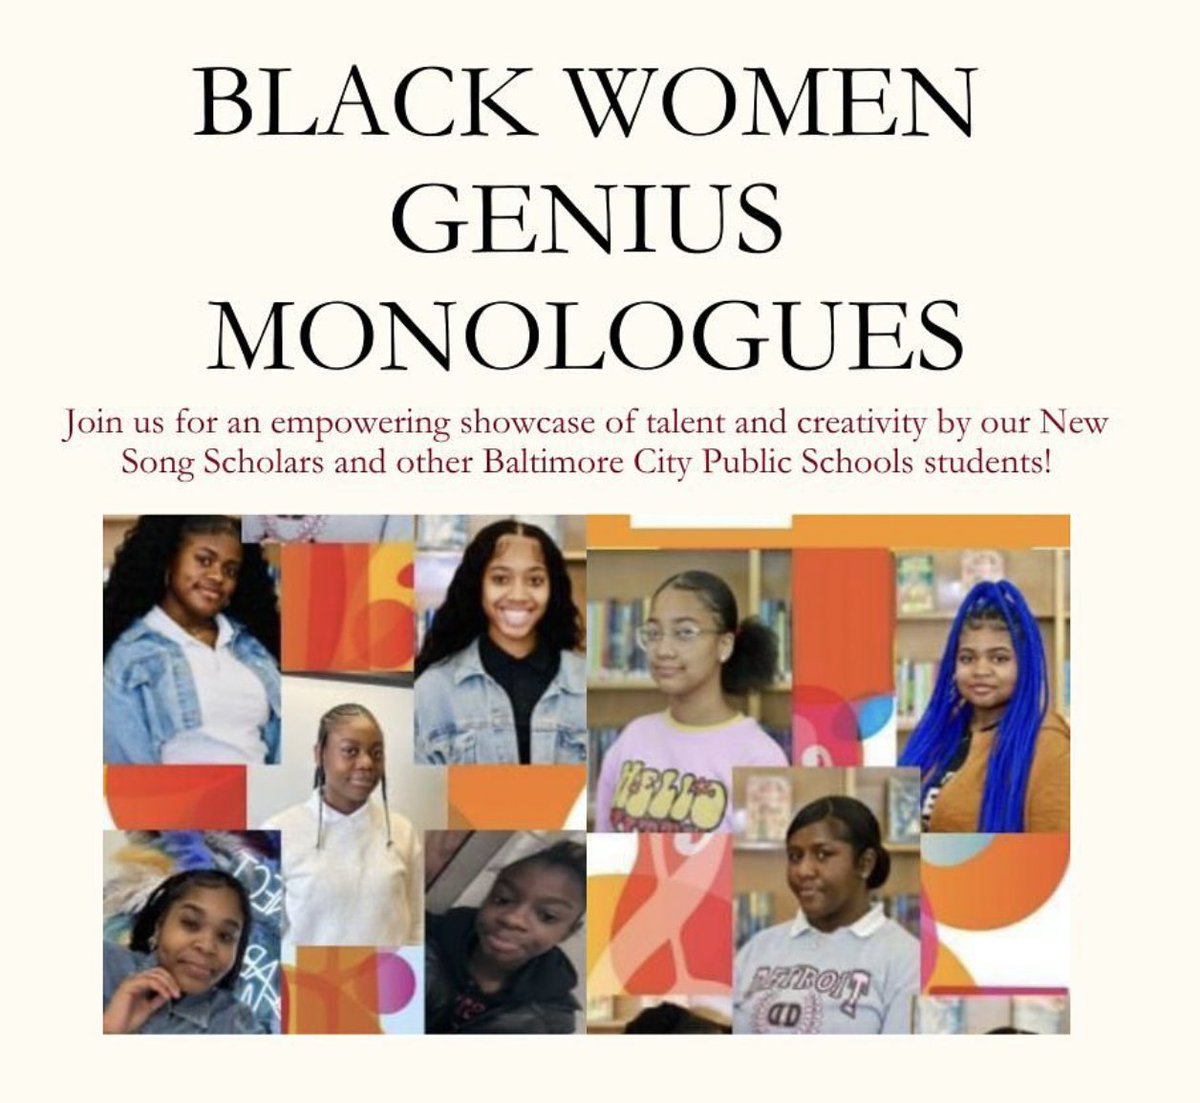 Did you get to join us at our Black Women Genius Monologues event? #NewSongStrong #BlackScholars